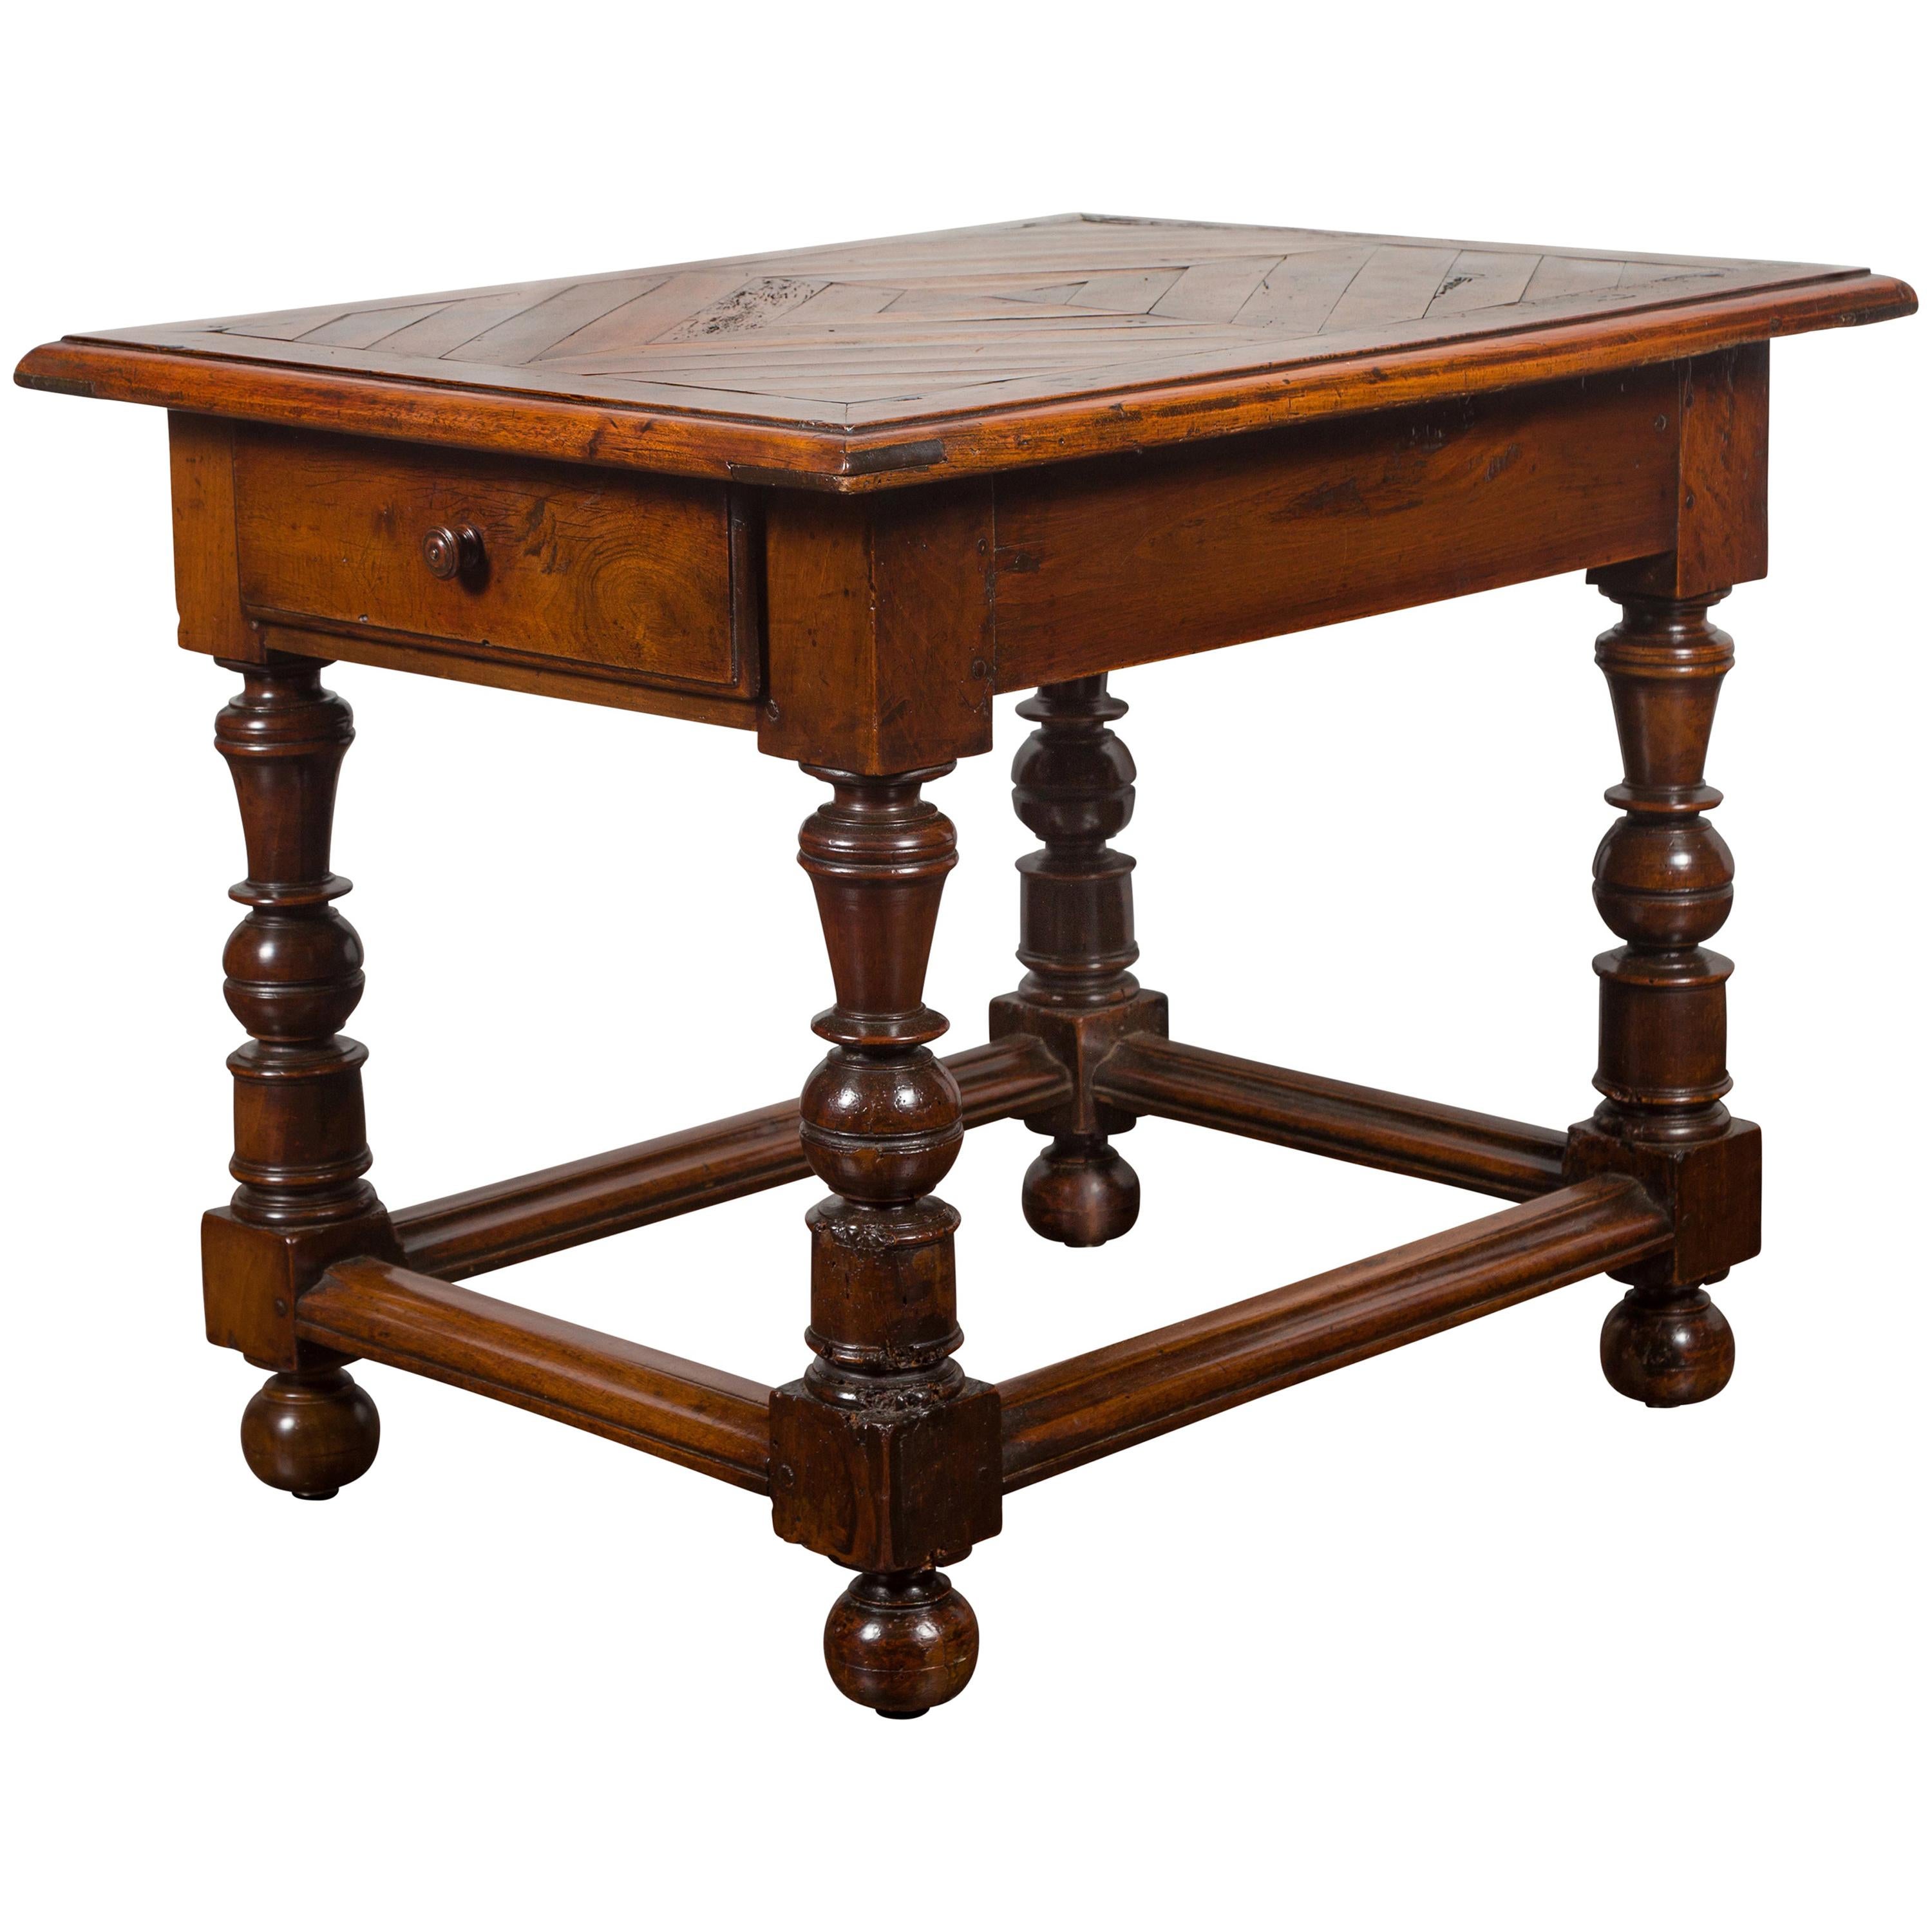 English 1850s Walnut Parquet Top Table with Single Drawer and Turned Legs For Sale